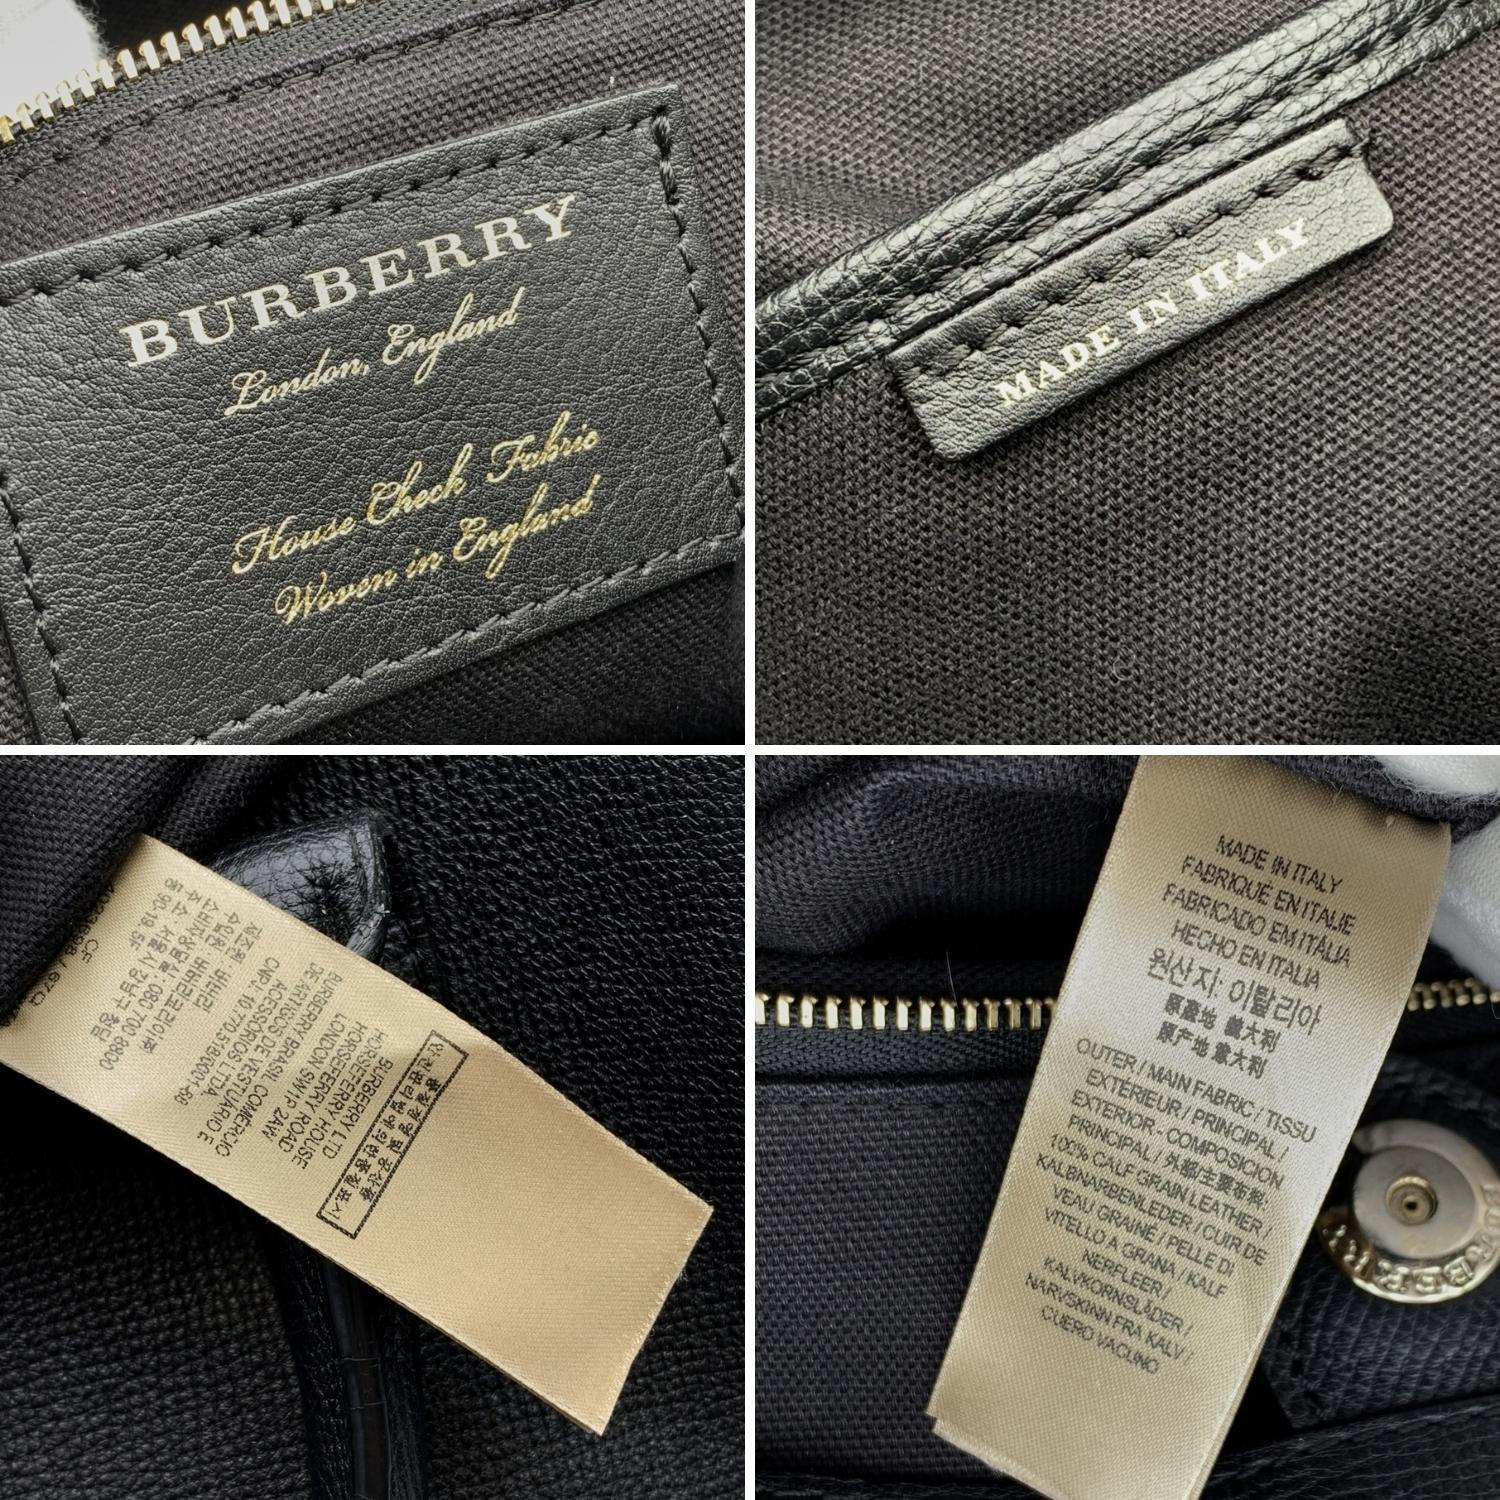 Women's Burberry Black Leather The Banner Tote Bag Satchel with Strap